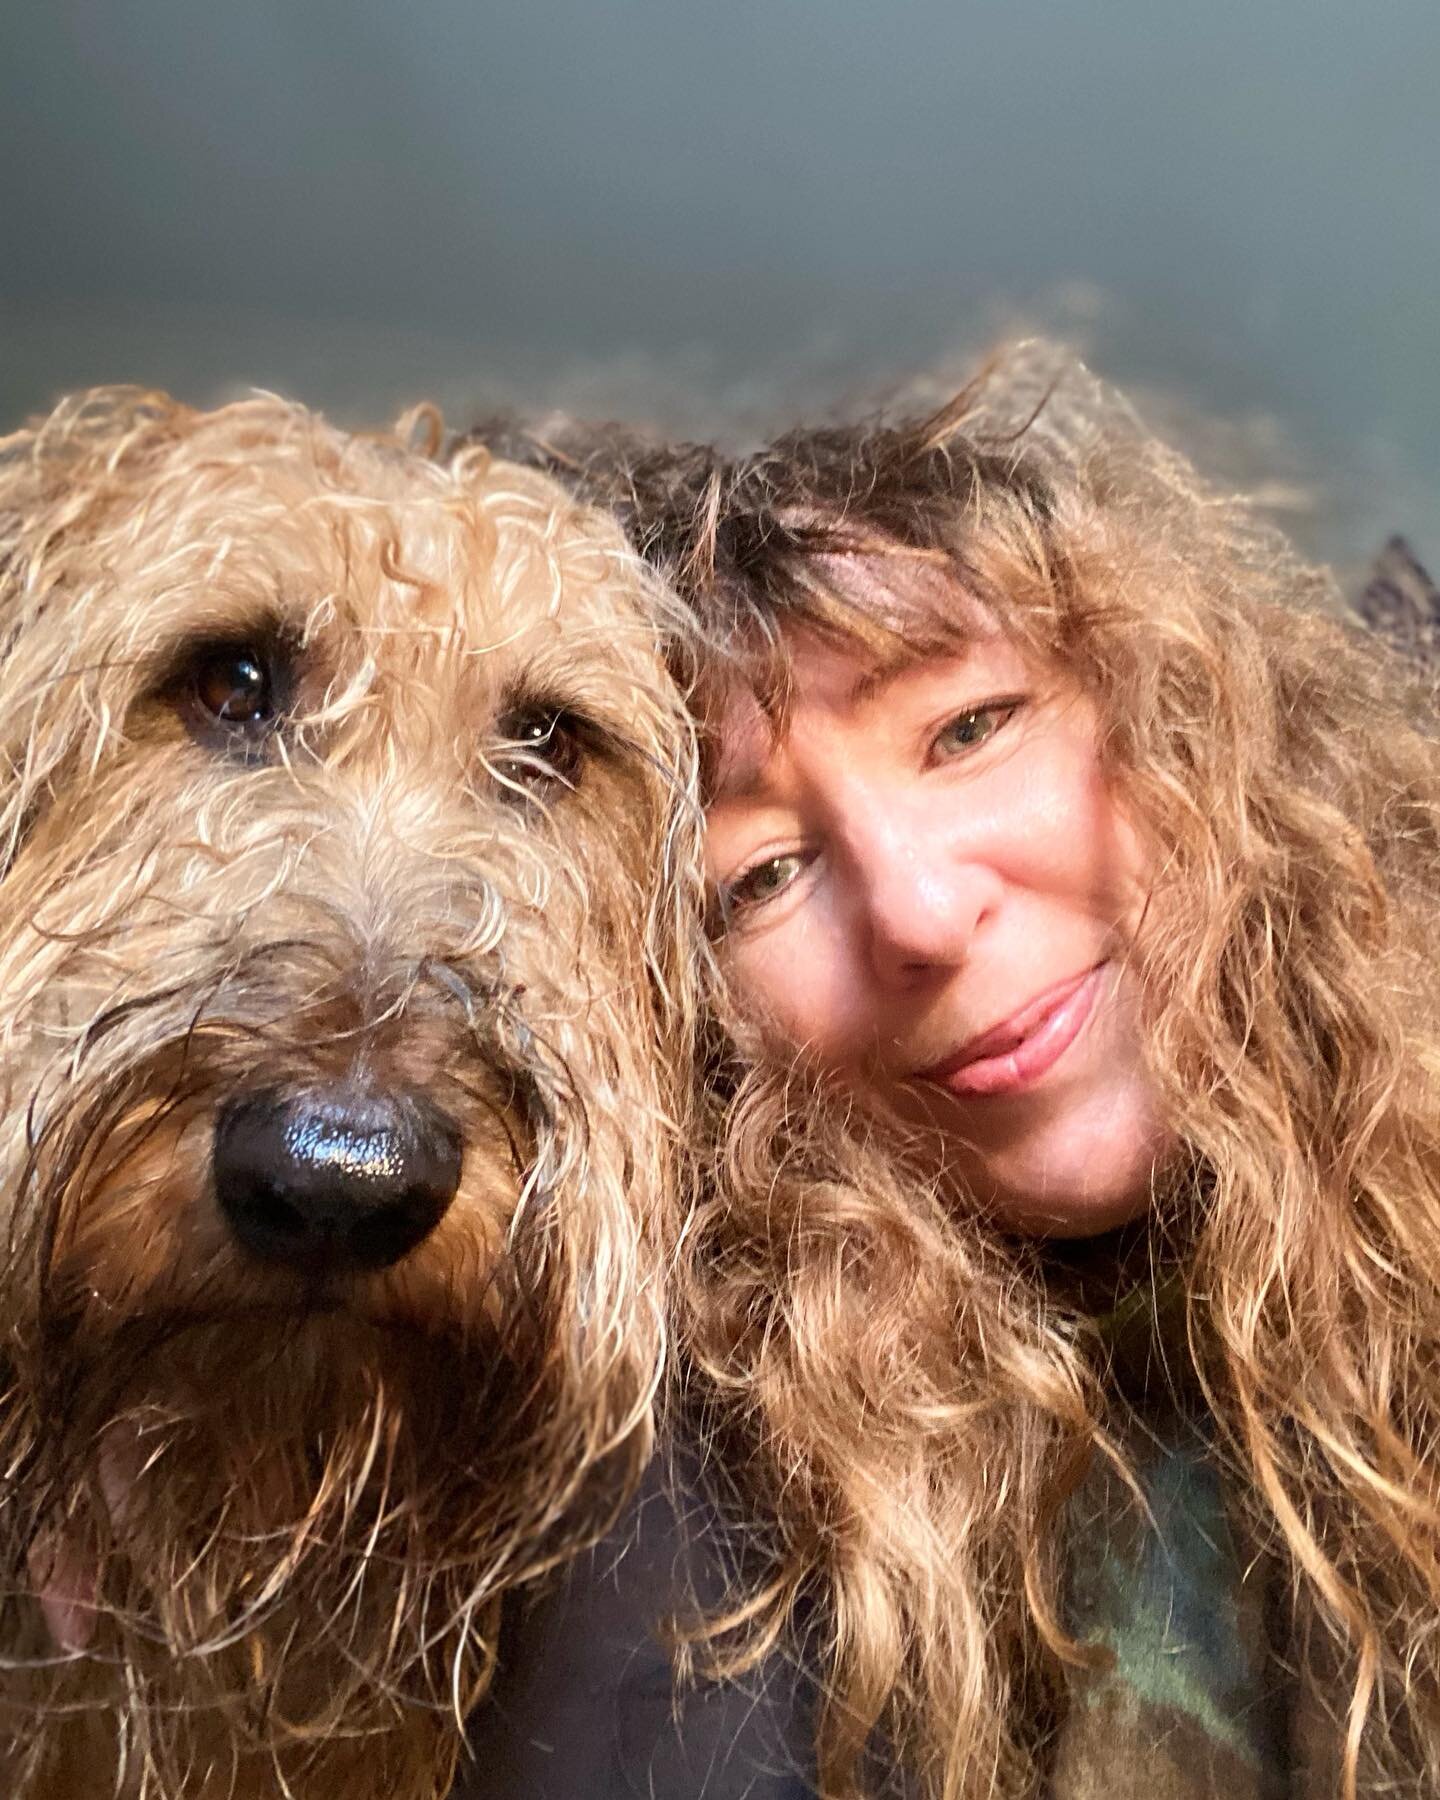 What is it they say about dogs and their owners? 🫣🤣We are having a bad hair day!😆🤣🥰❤️❤️